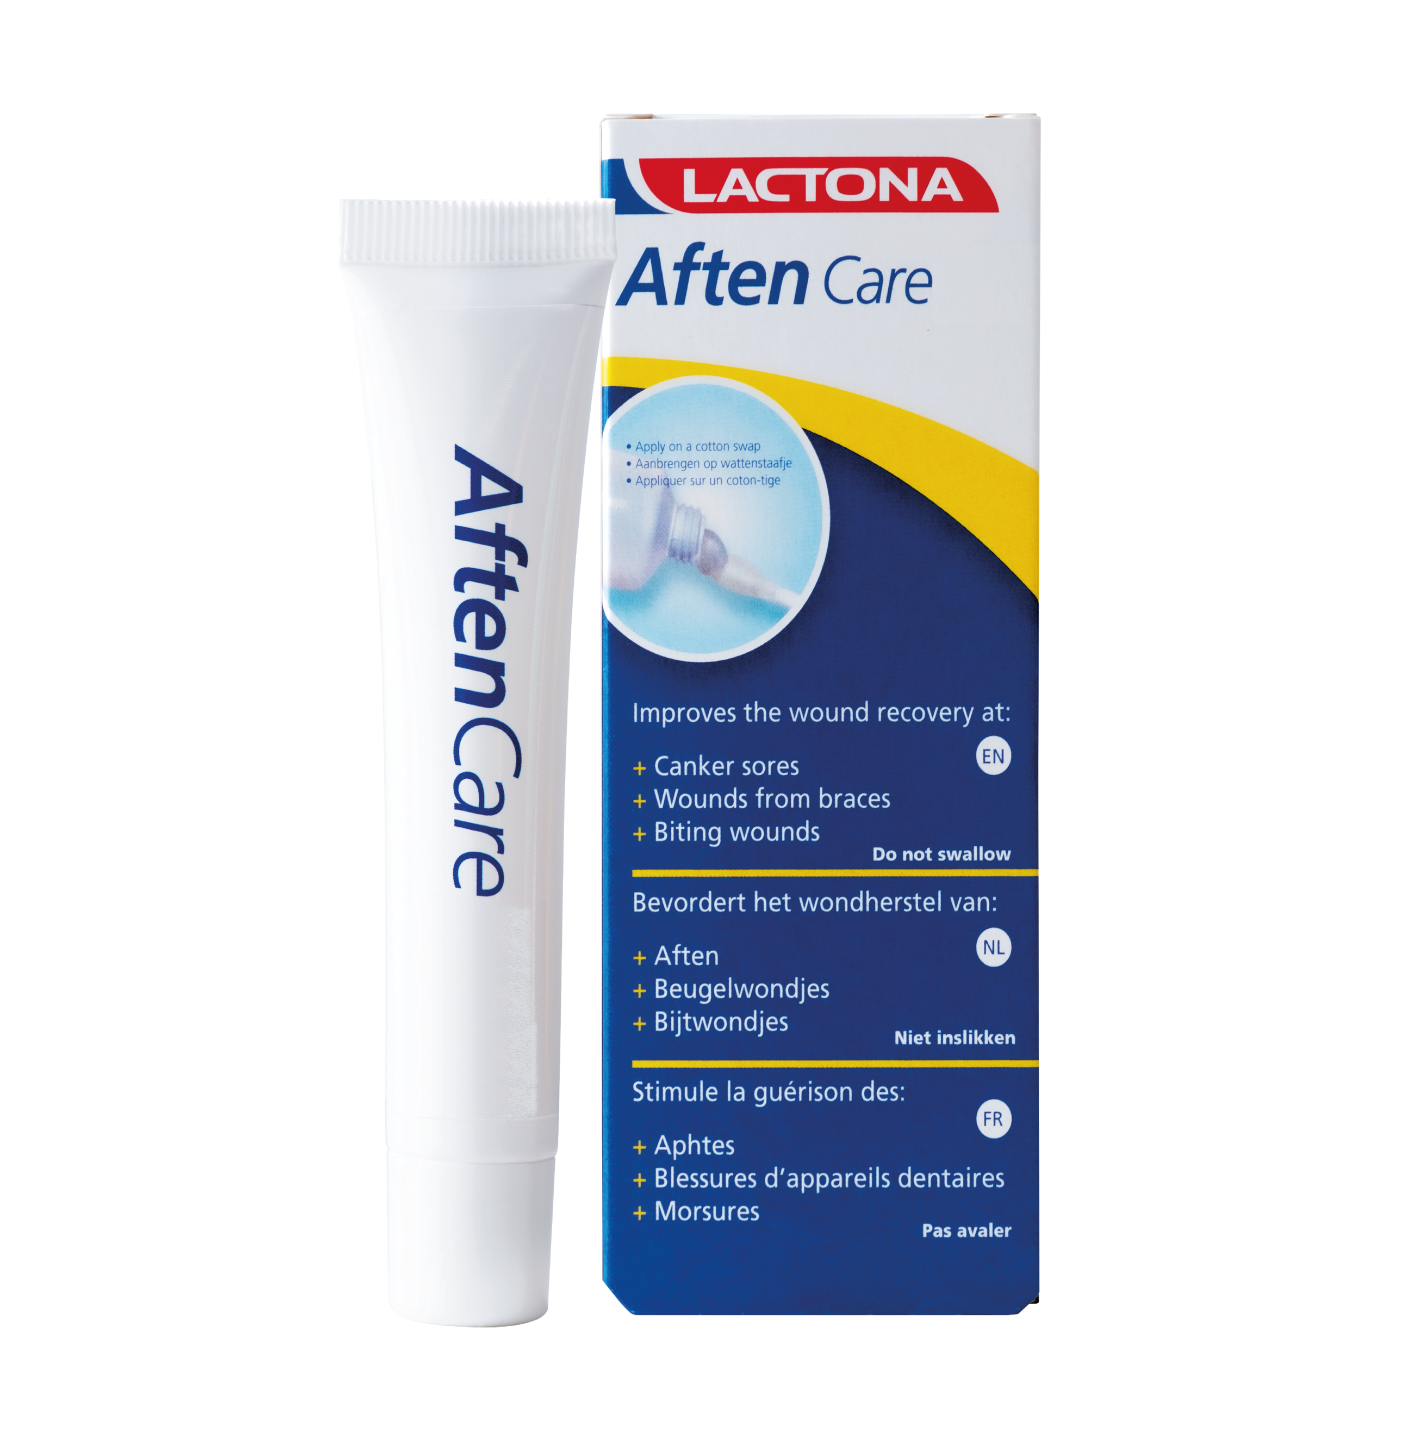 AftenCare